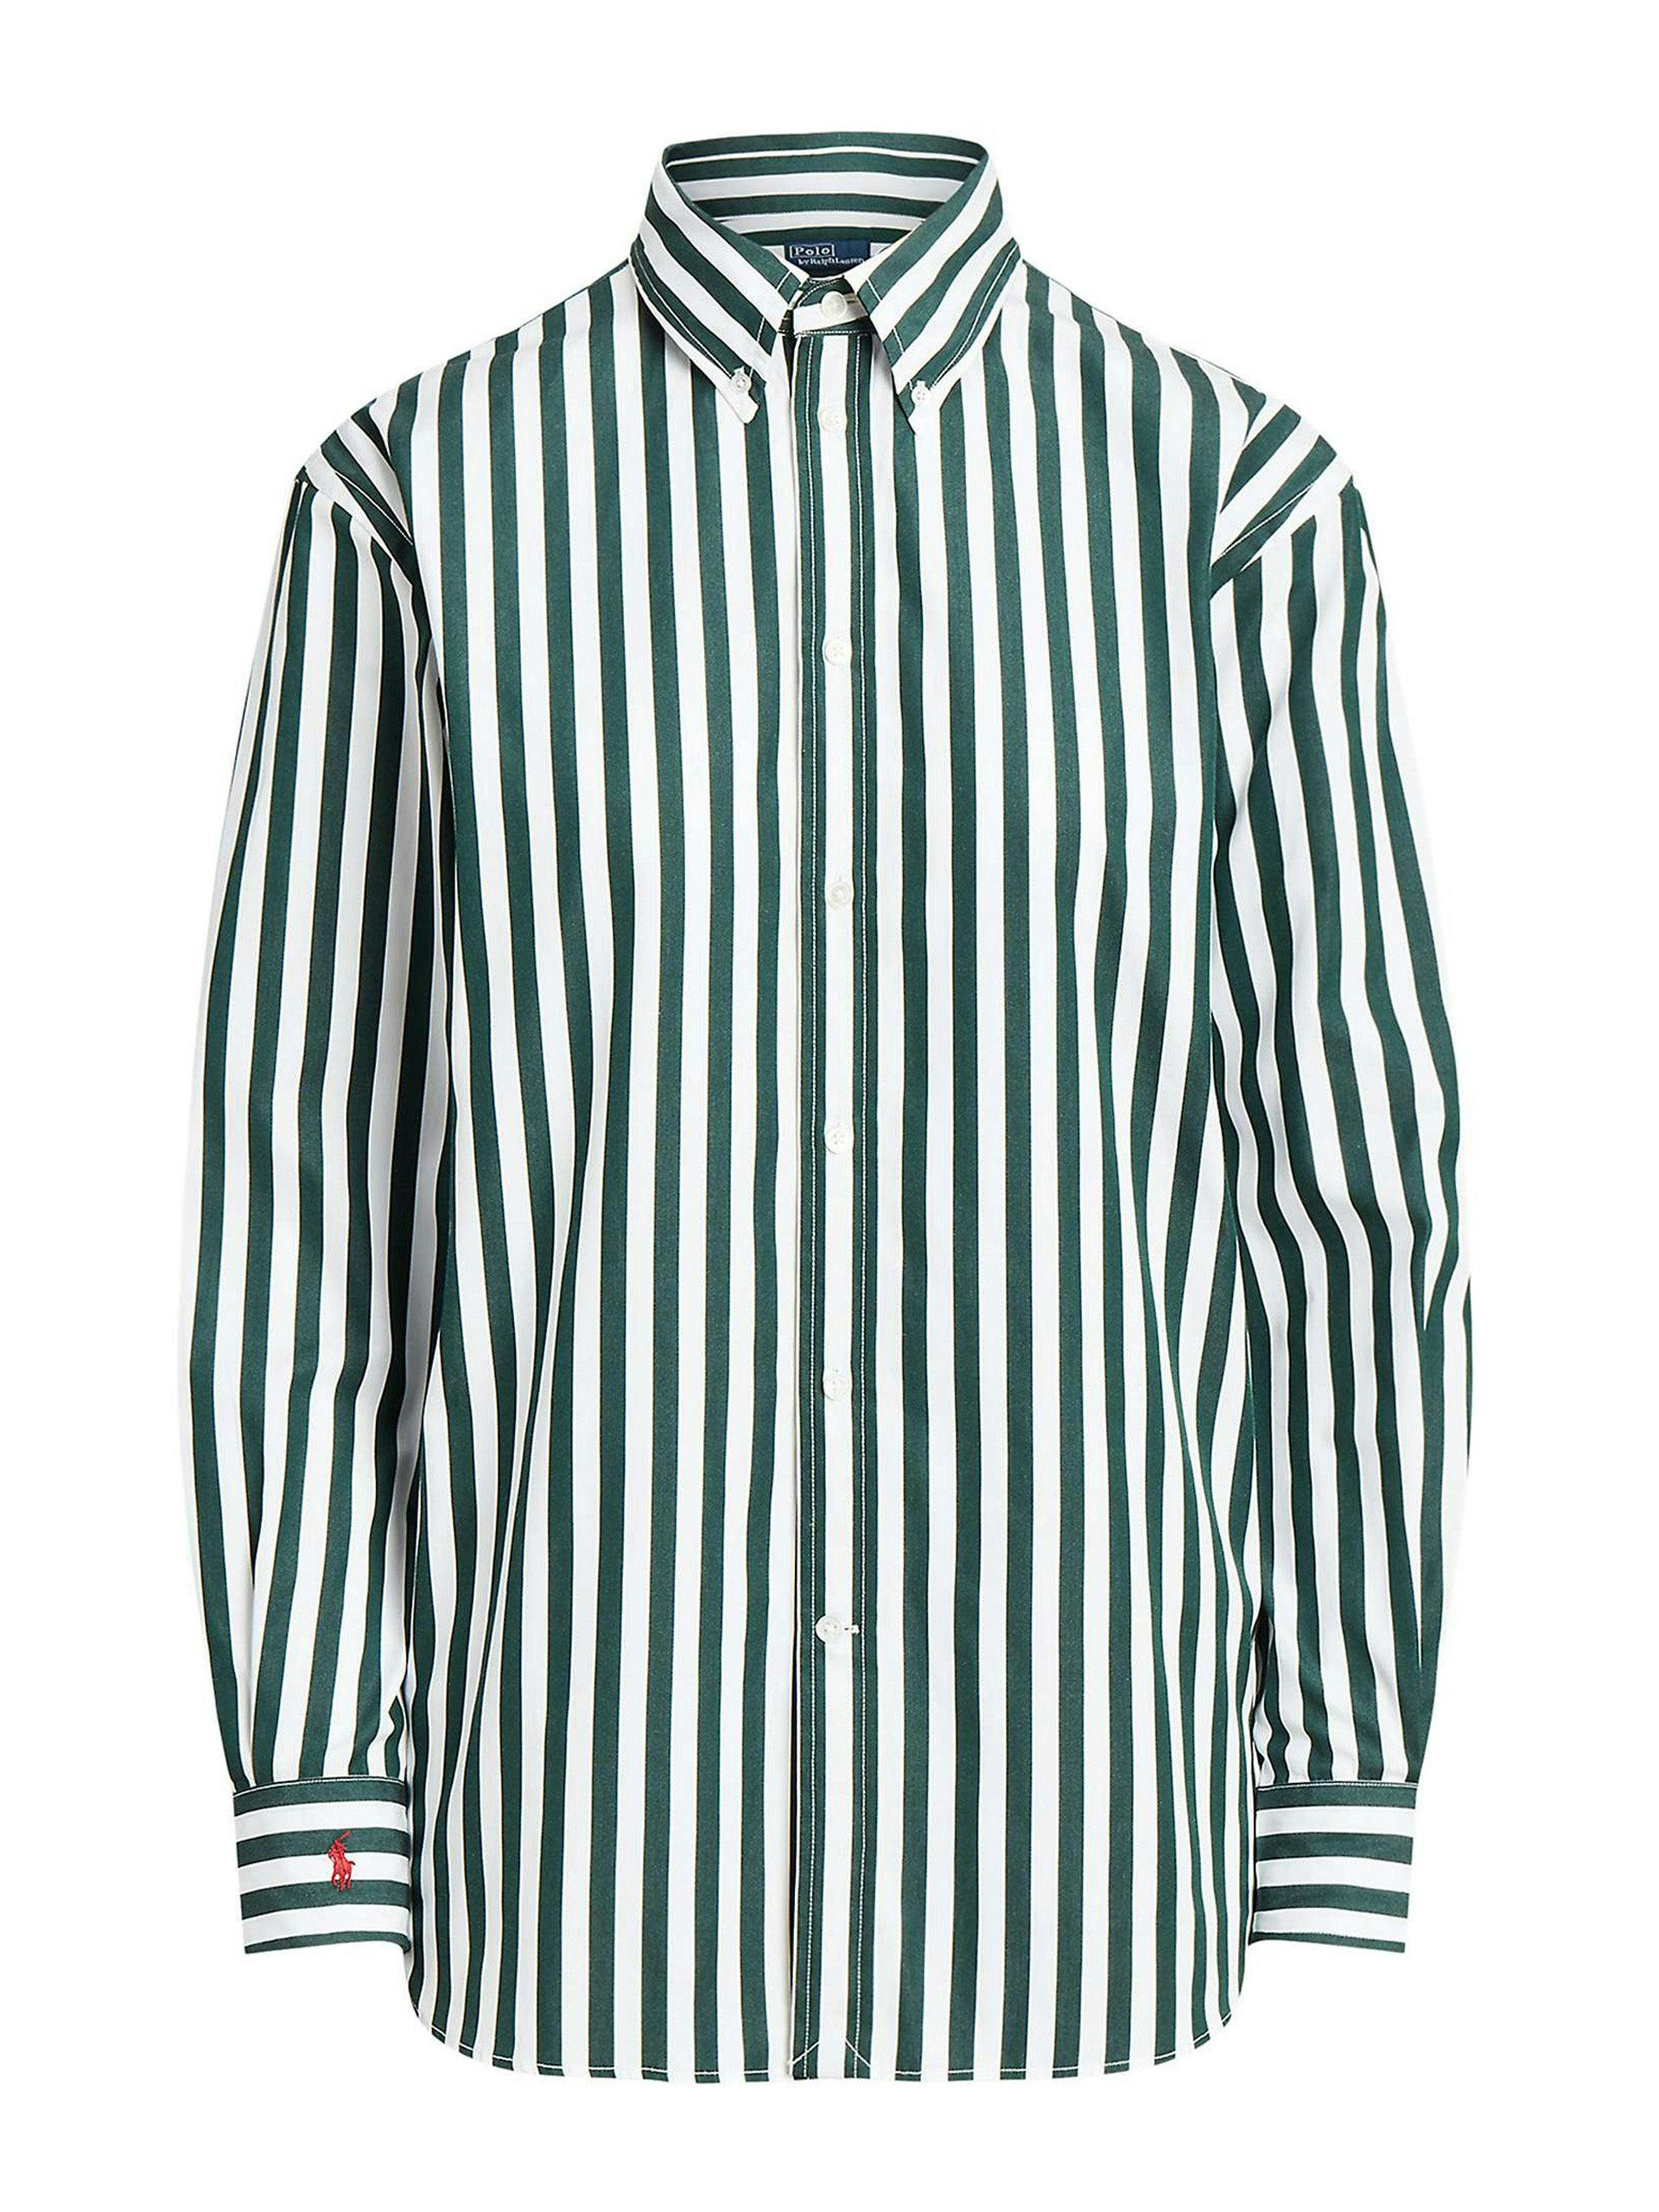 Olive and white striped relaxed shirt